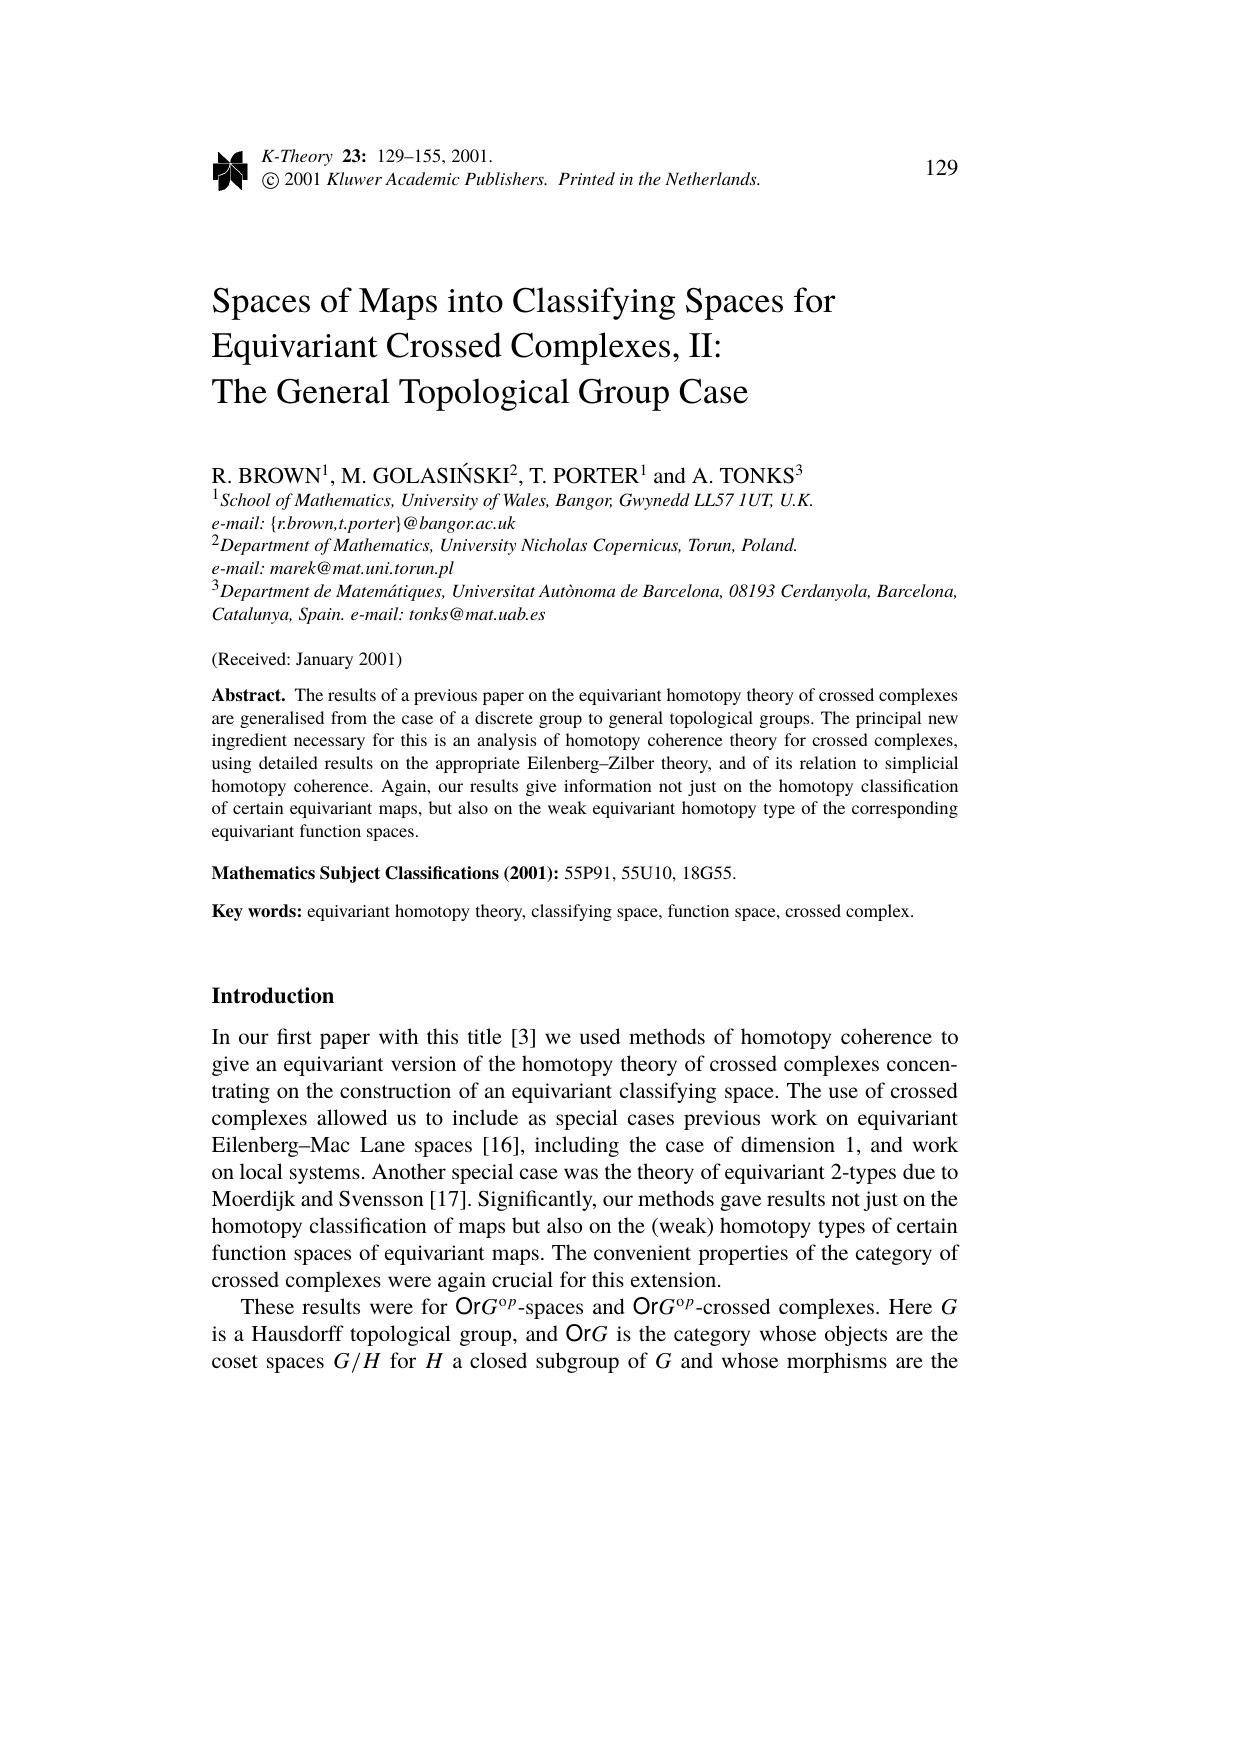 Spaces of Maps into Classifying Spaces for Equivariant Crossed Complexes, II: The General Topological Group Case by Unknown